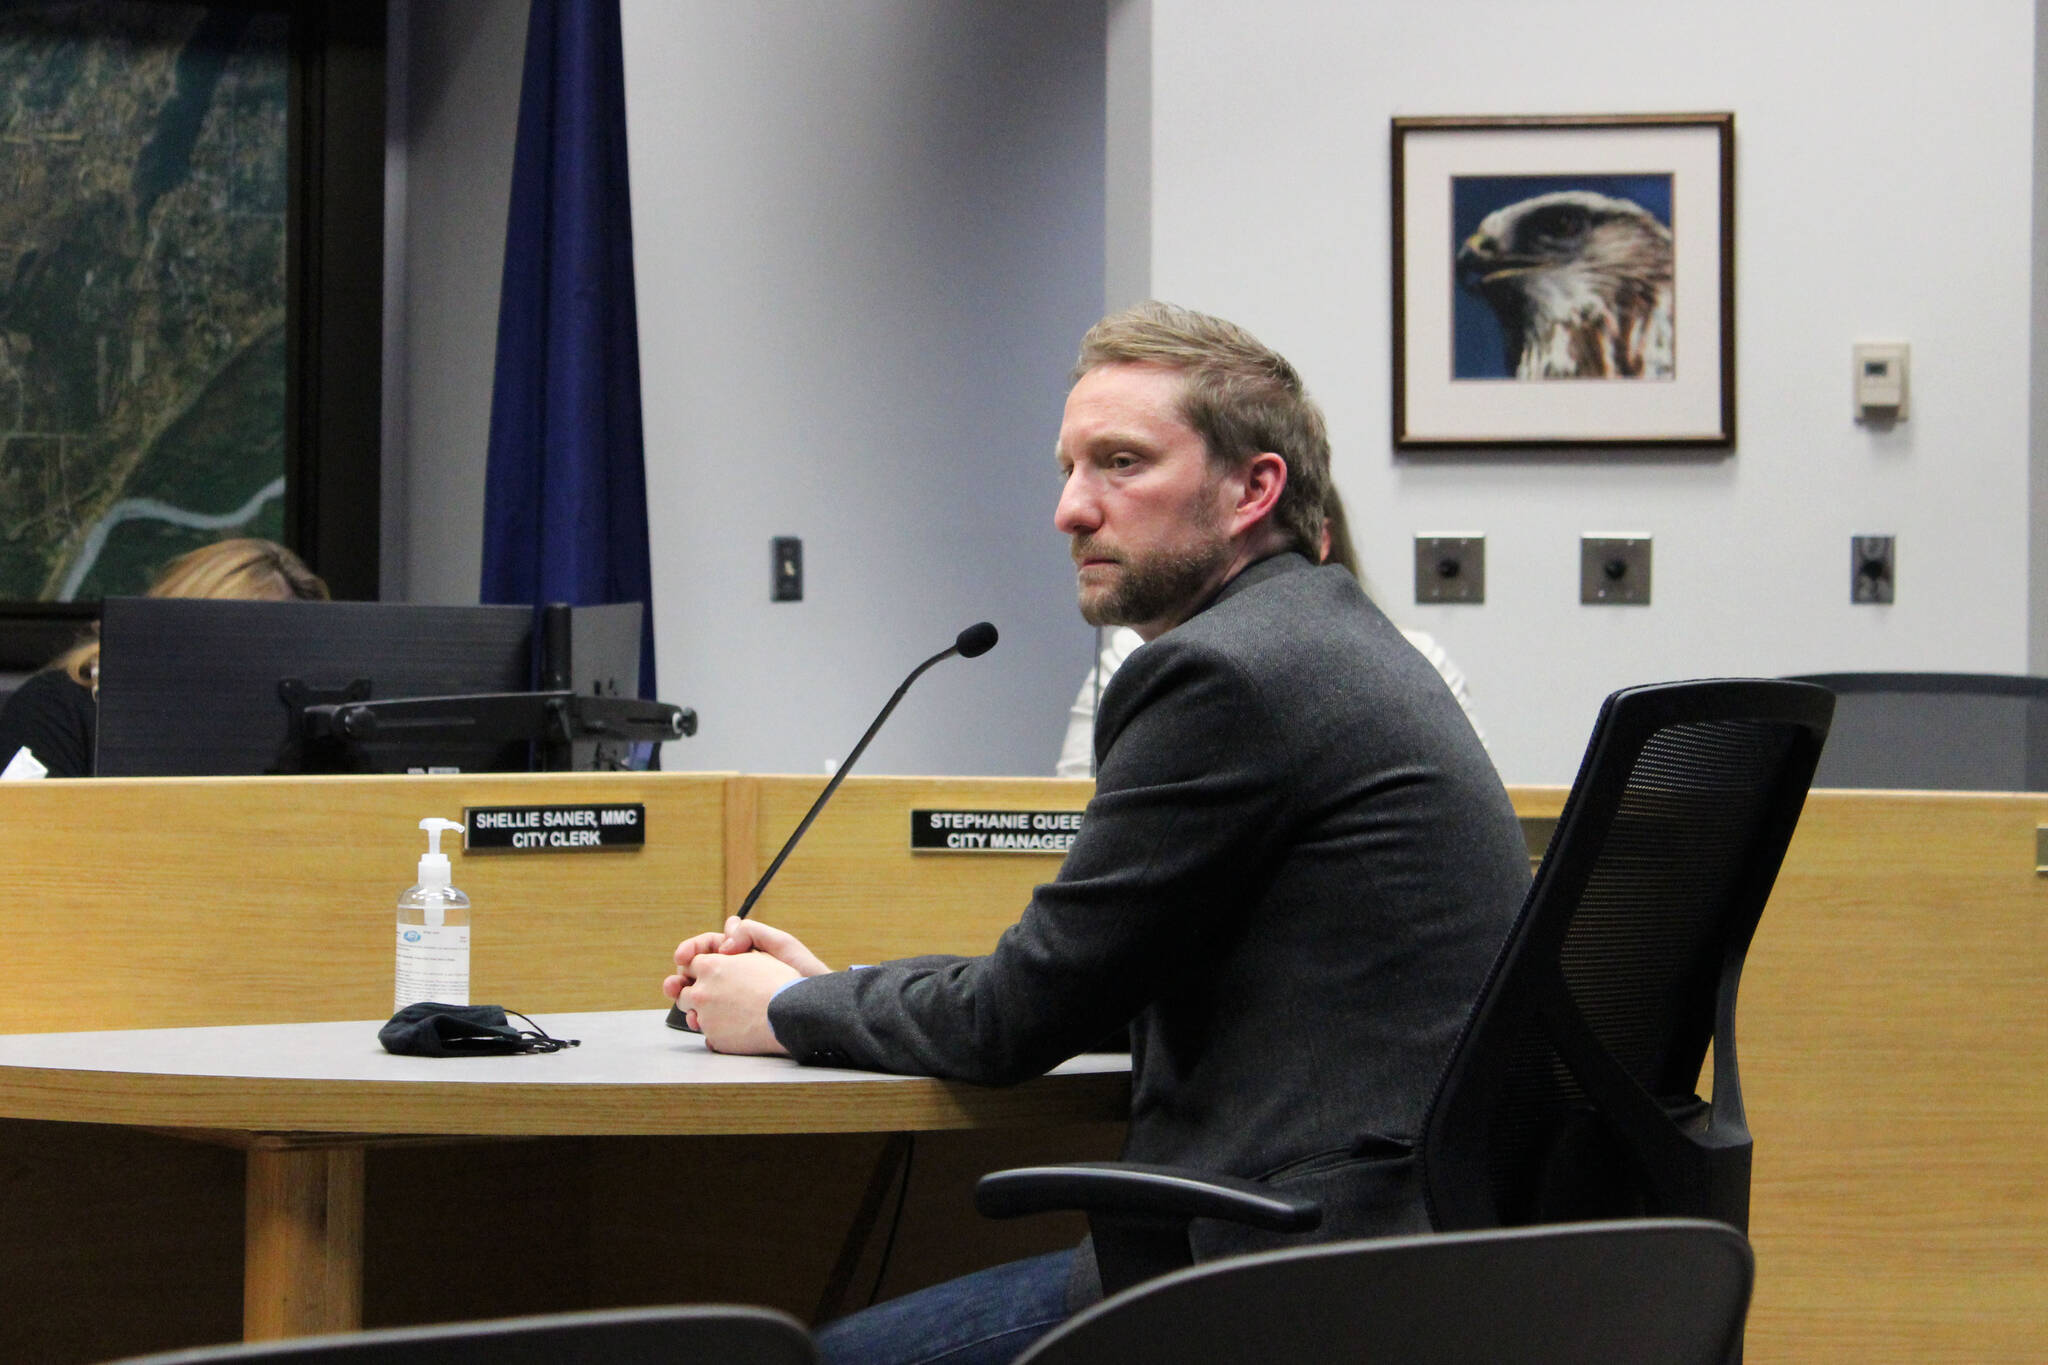 Alaskans for Better Elections Executive Director Jason Grenn presents on upcoming changes to Alaska elections during a meeting of the Soldotna City Council on Wednesday, Nov. 10, 2021 in Soldotna, Alaska. (Ashlyn O’Hara/Peninsula Clarion)